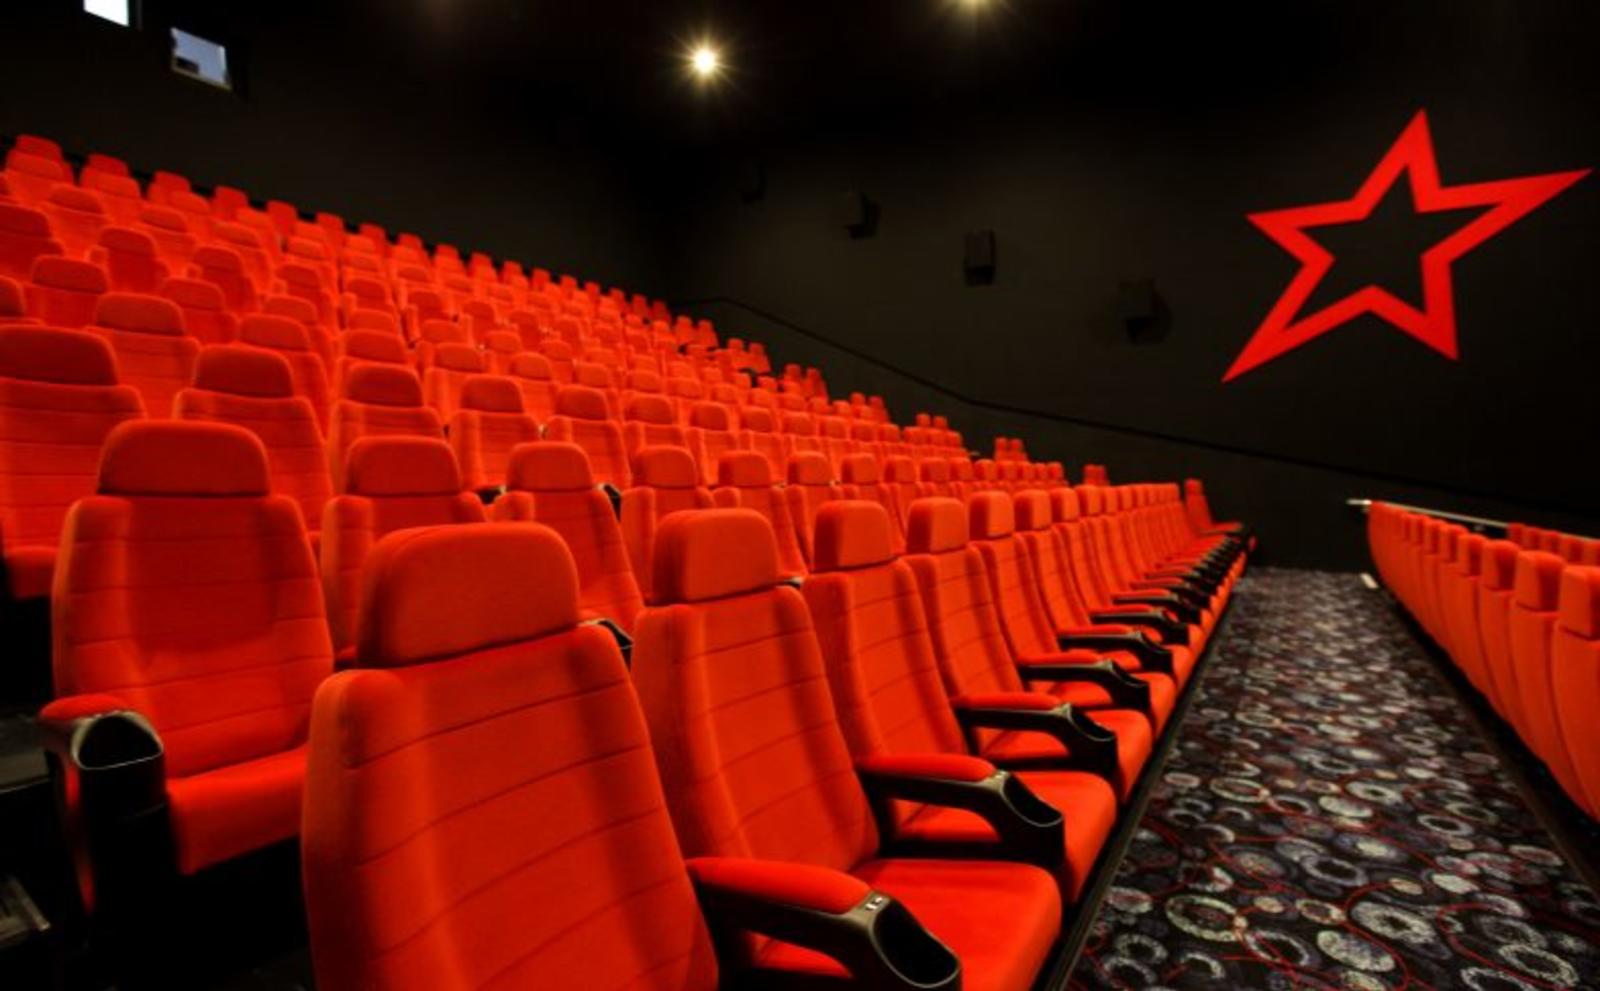 Cineworld Jersey: A Cinematic Experience in the Heart of the Channel Islands